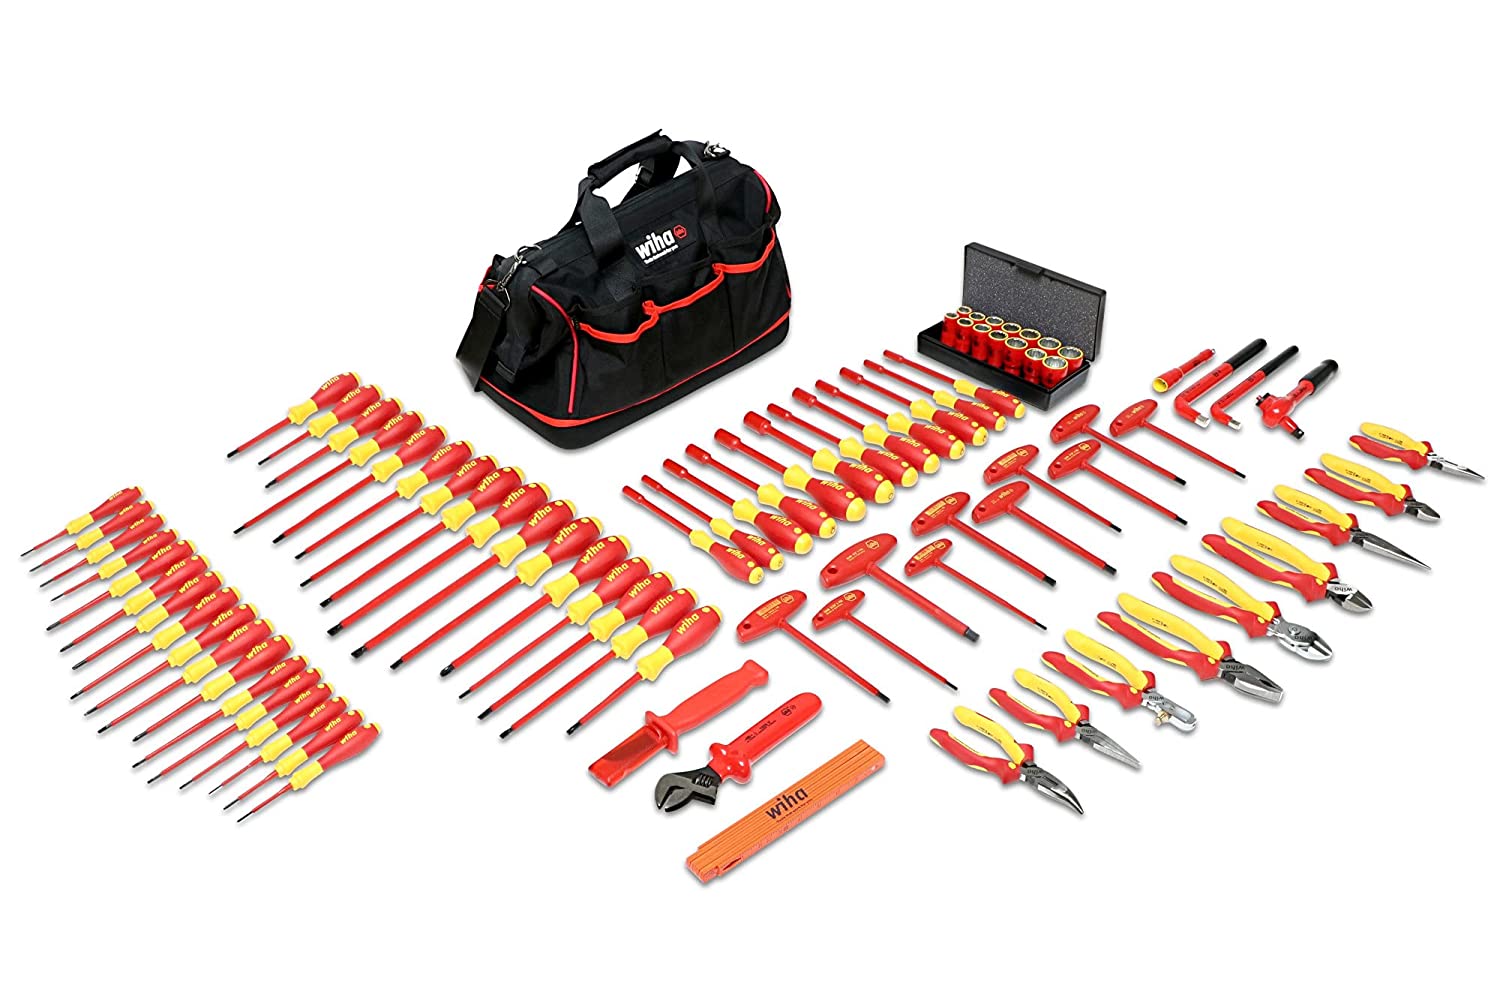 Wiha 32877 Insulated Set with Pliers, Cutters, Nut Drivers, Screwdrivers, T Handles, Knife, Sockets, 3/8-Inch Ratchet, Adj Wrench, Ruler, 80-Piece